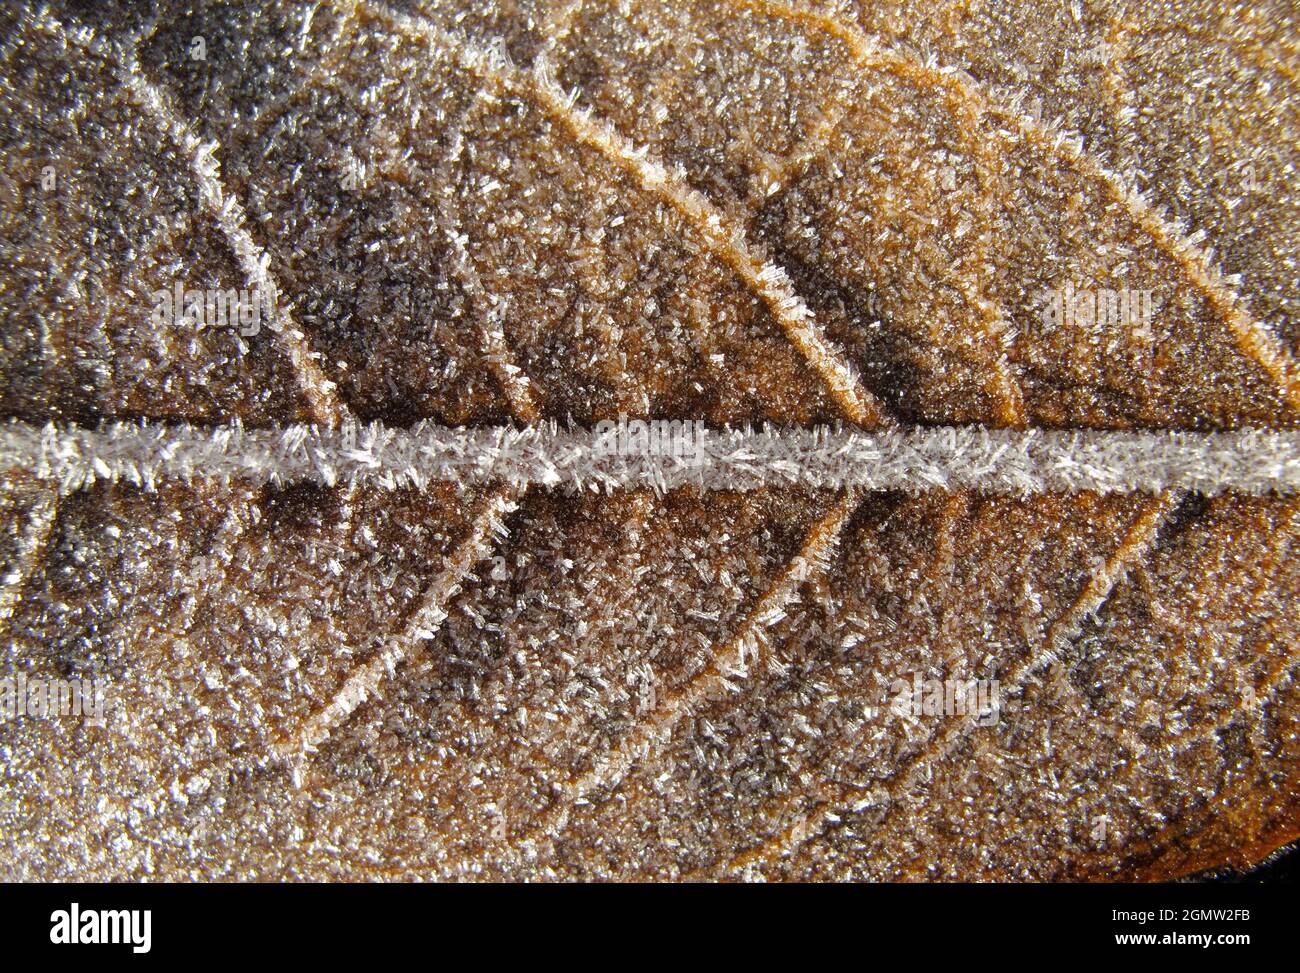 Anything can display the beauty of pattern and form if you get close enough. The stunning symmetry and crystalline purity of this frost-encrusted leaf Stock Photo